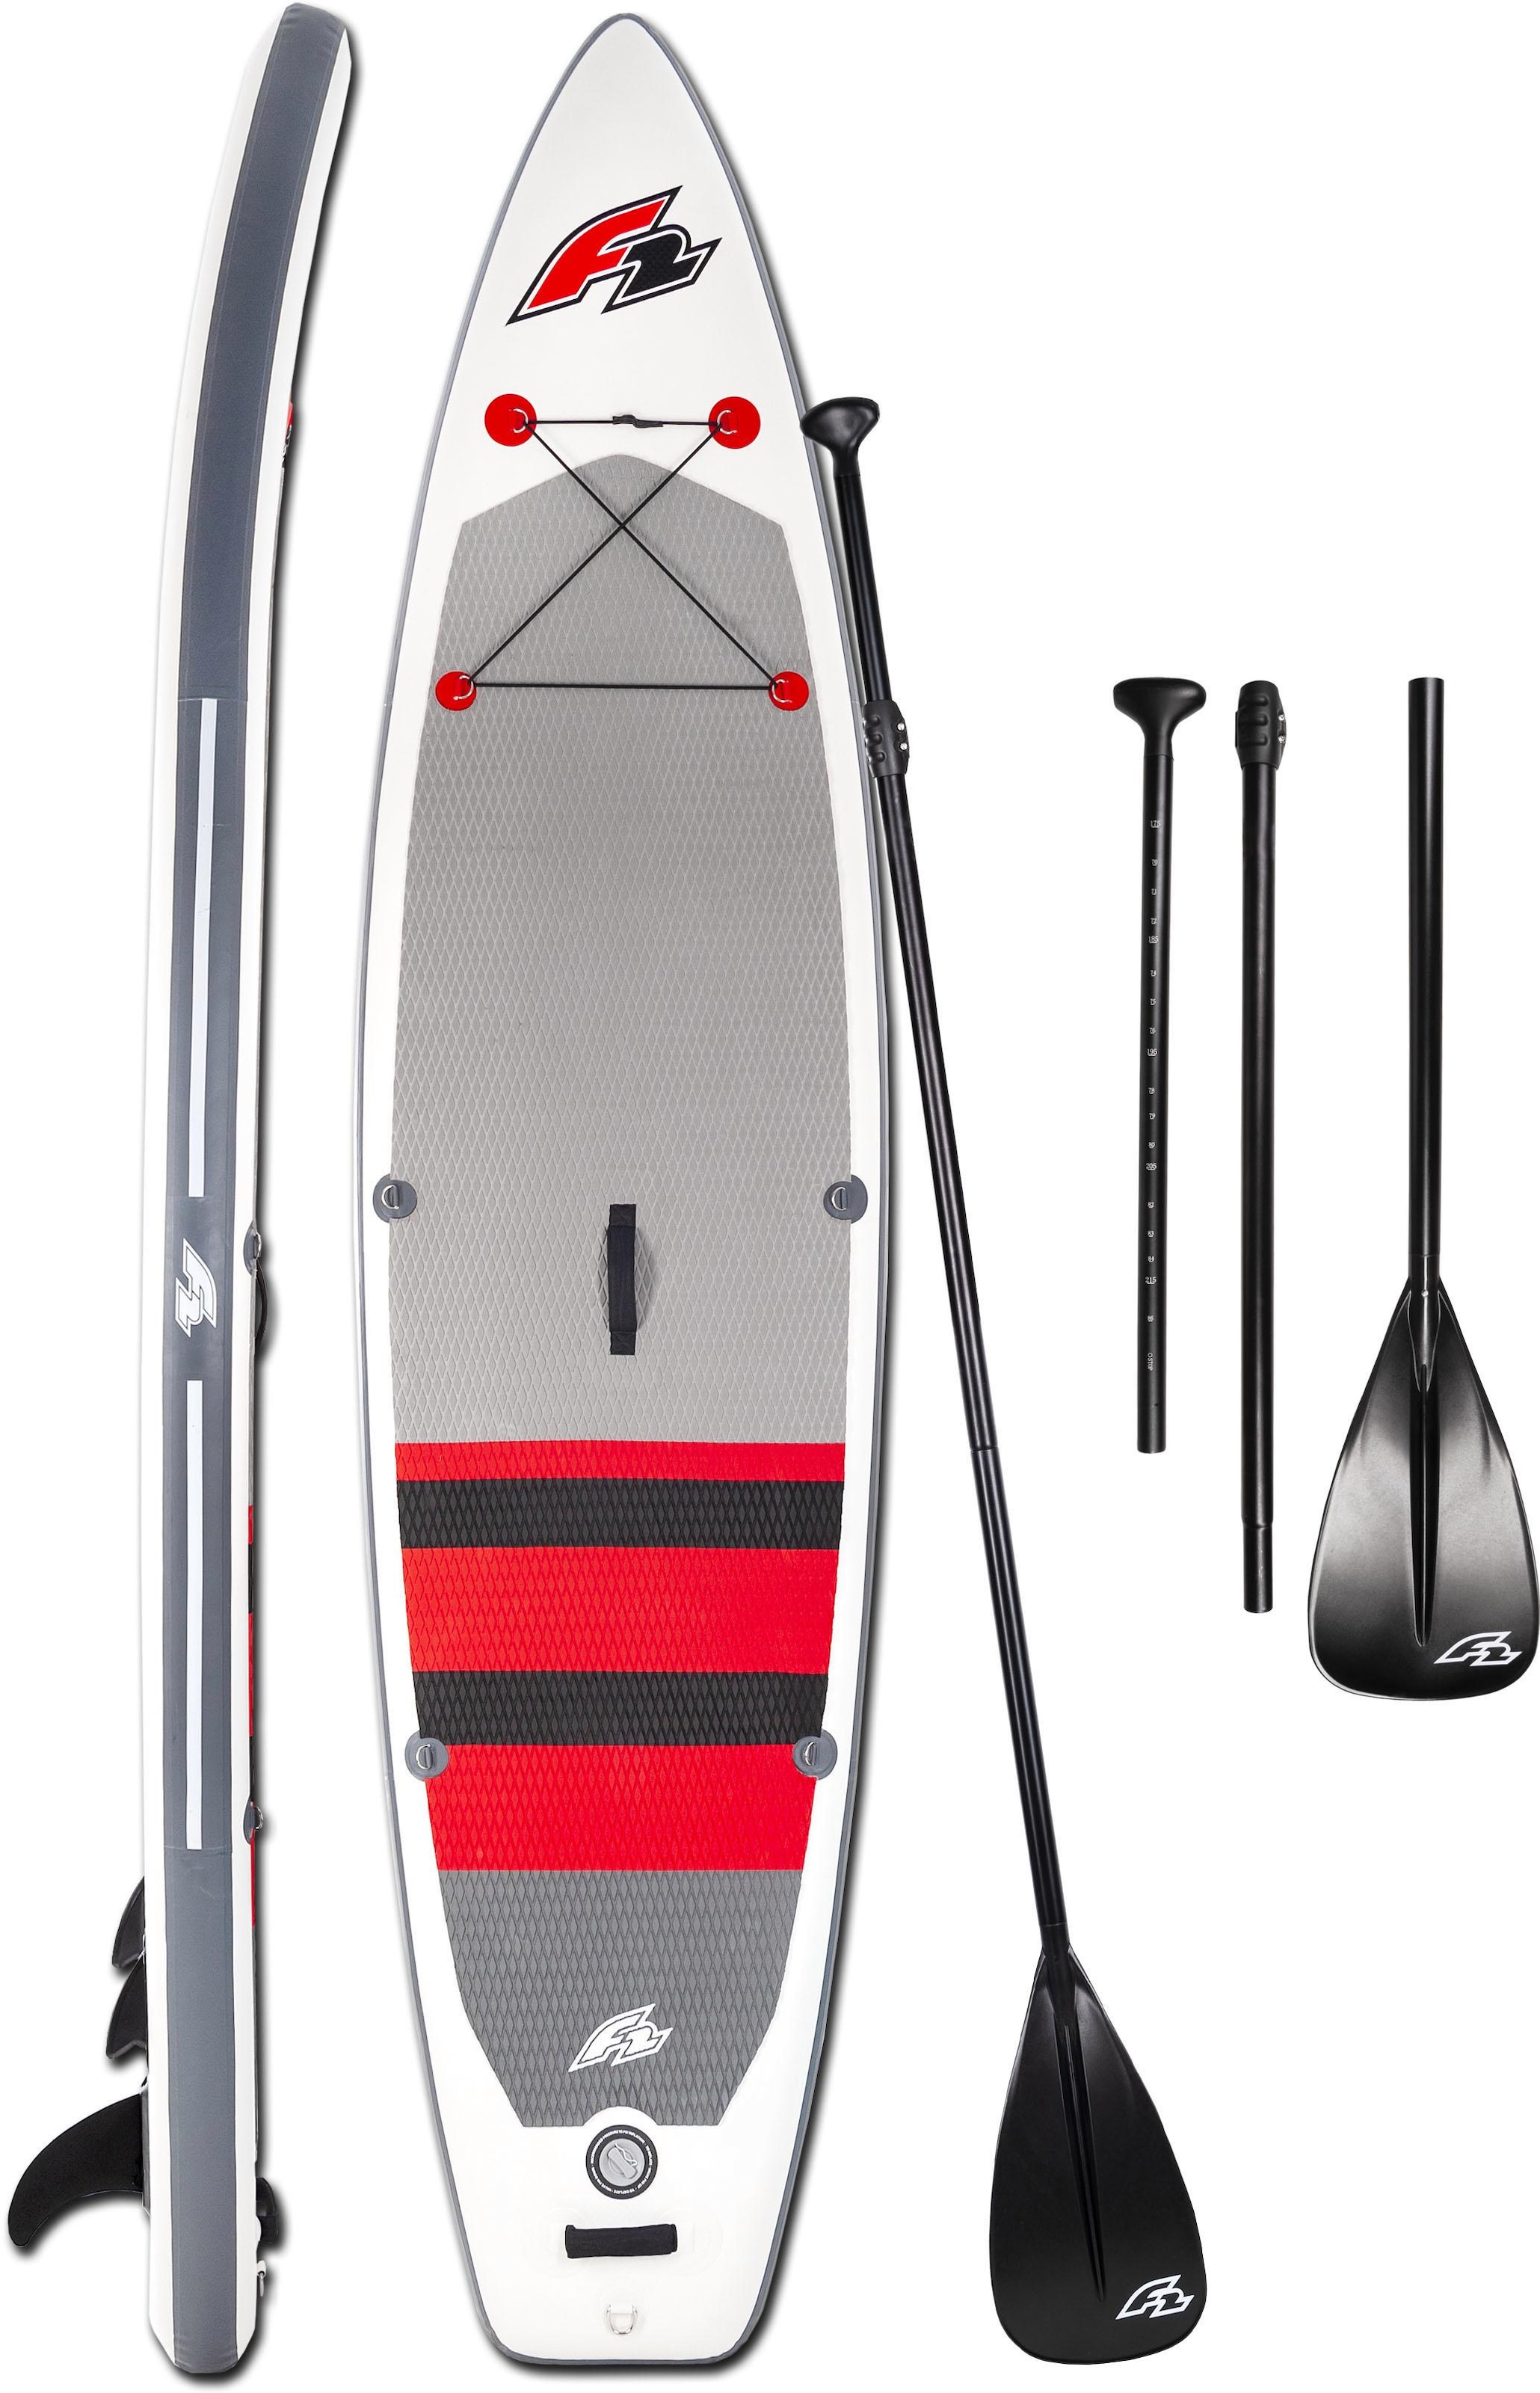 Up »Union Paddling 11,5«, SUP-Board F2 5 Stand Inflatable bei tlg.), (Set,